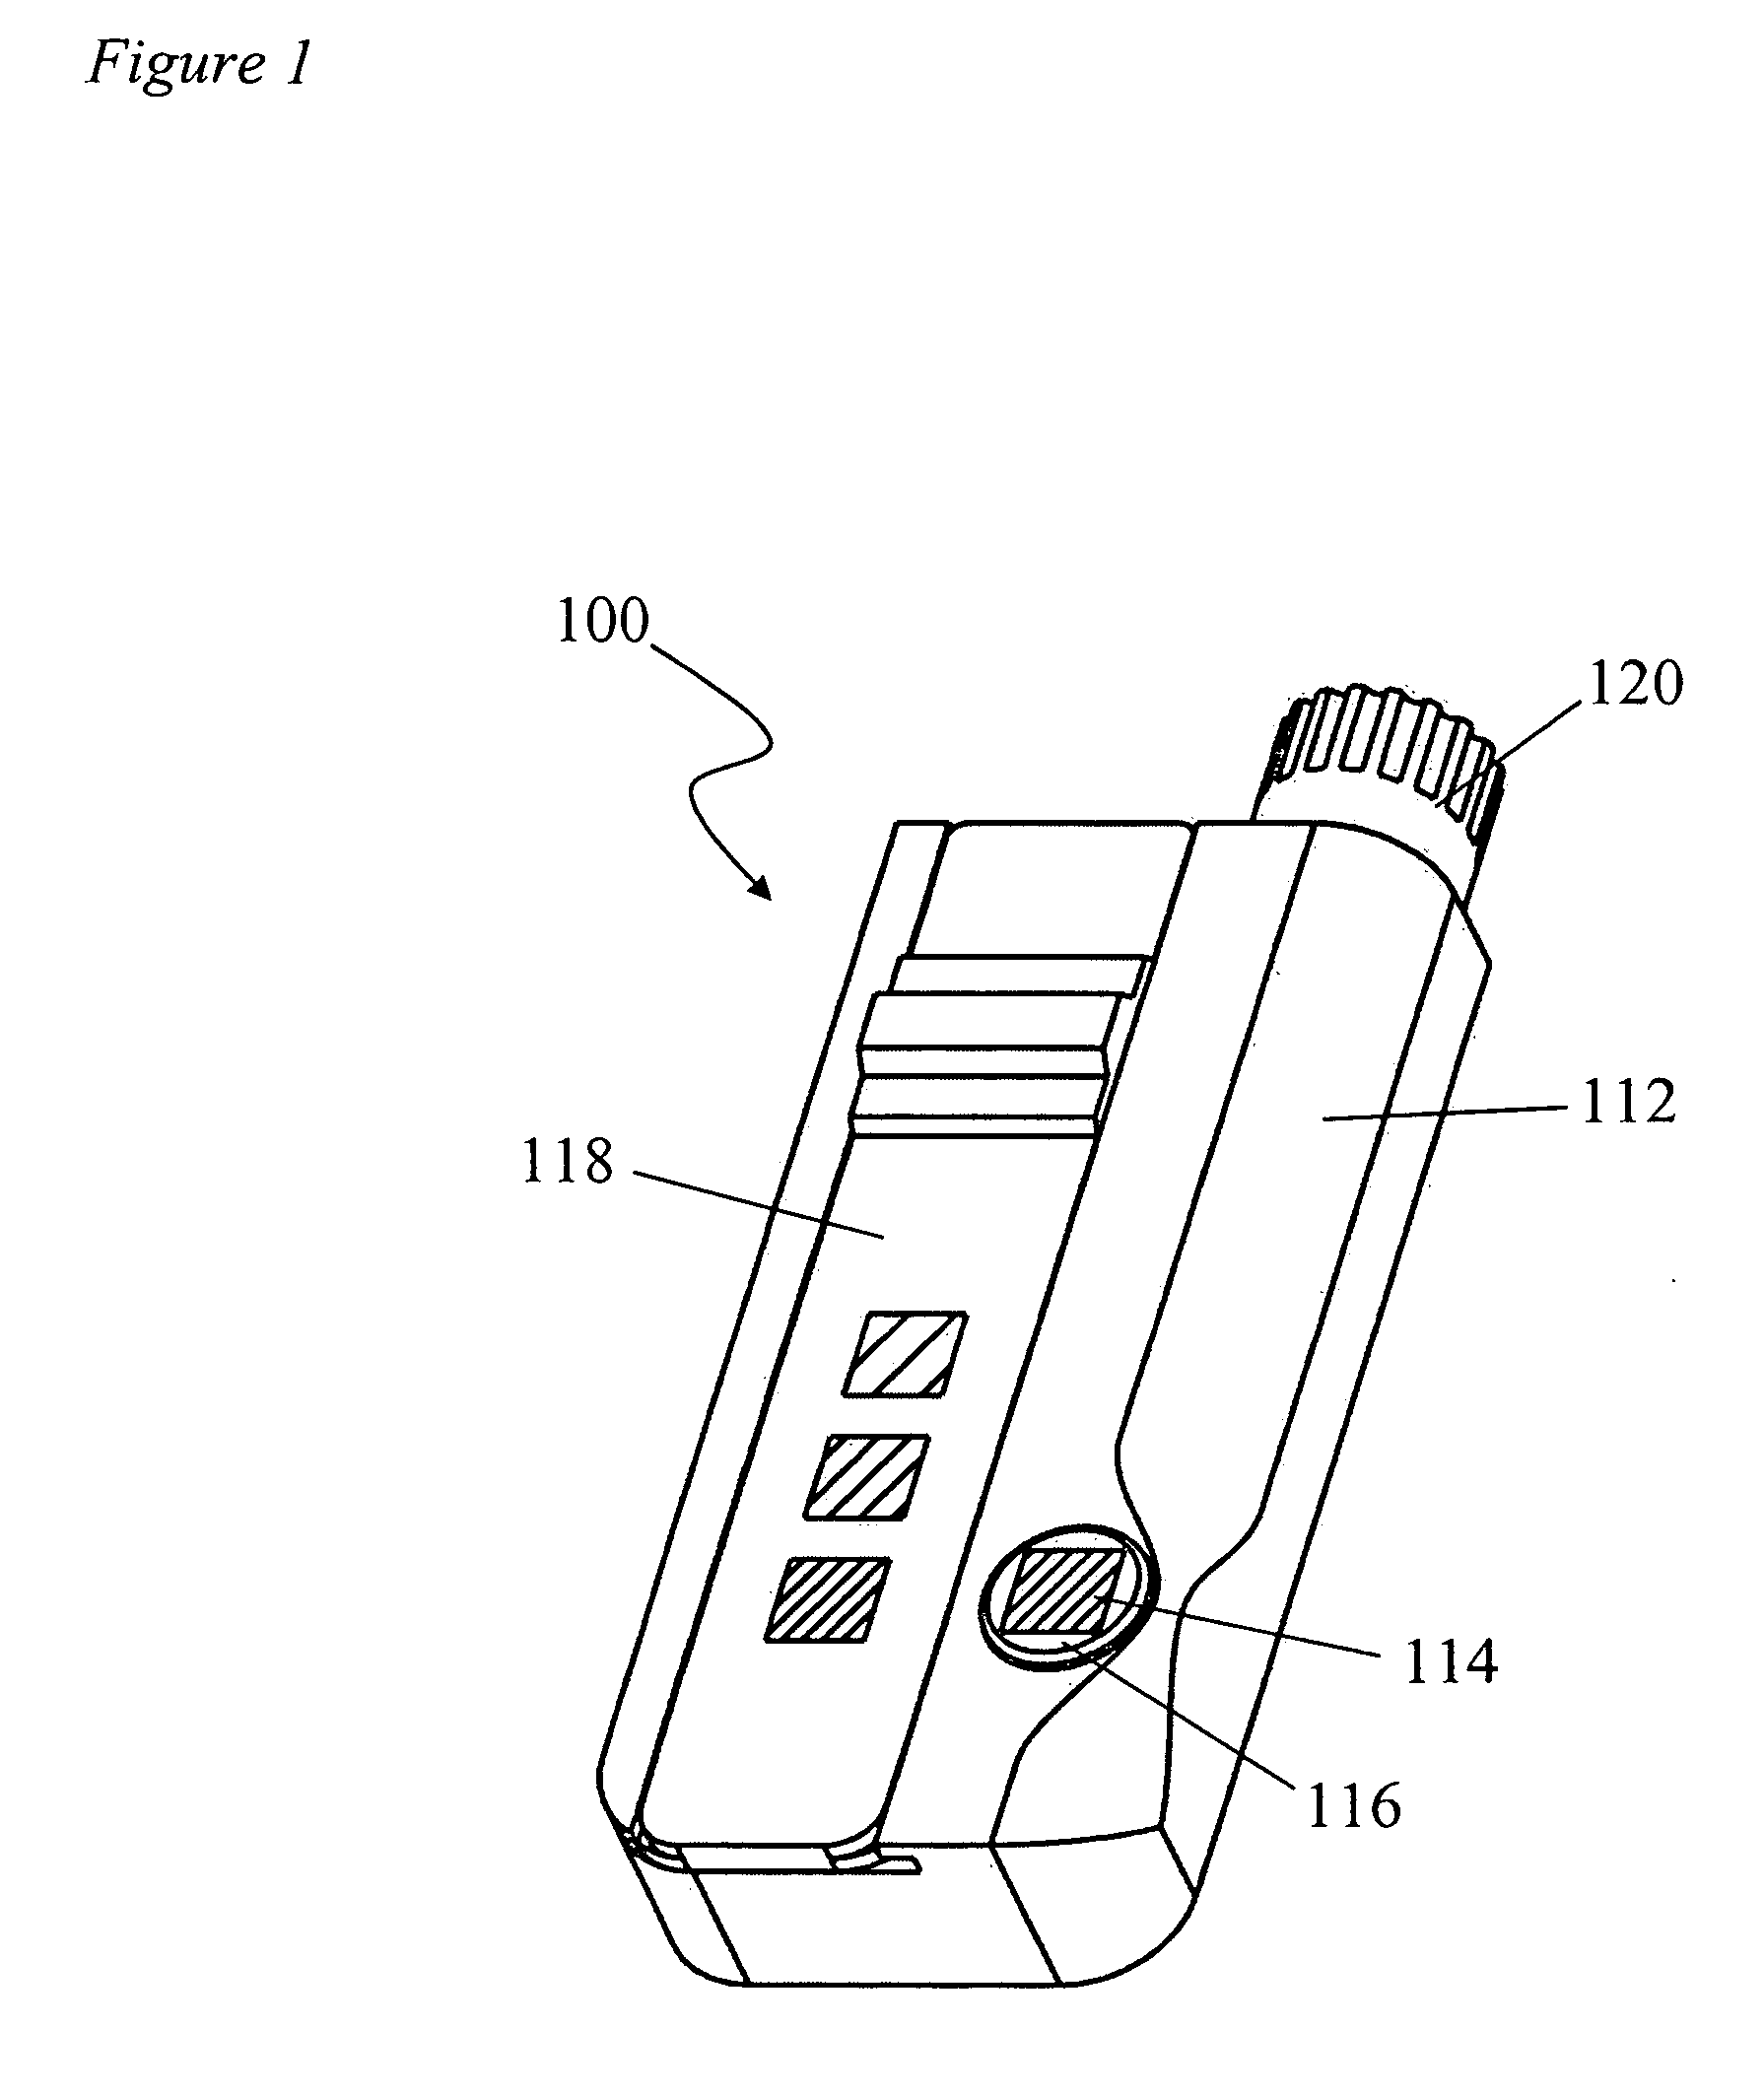 Devices for analyte assays and methods of use